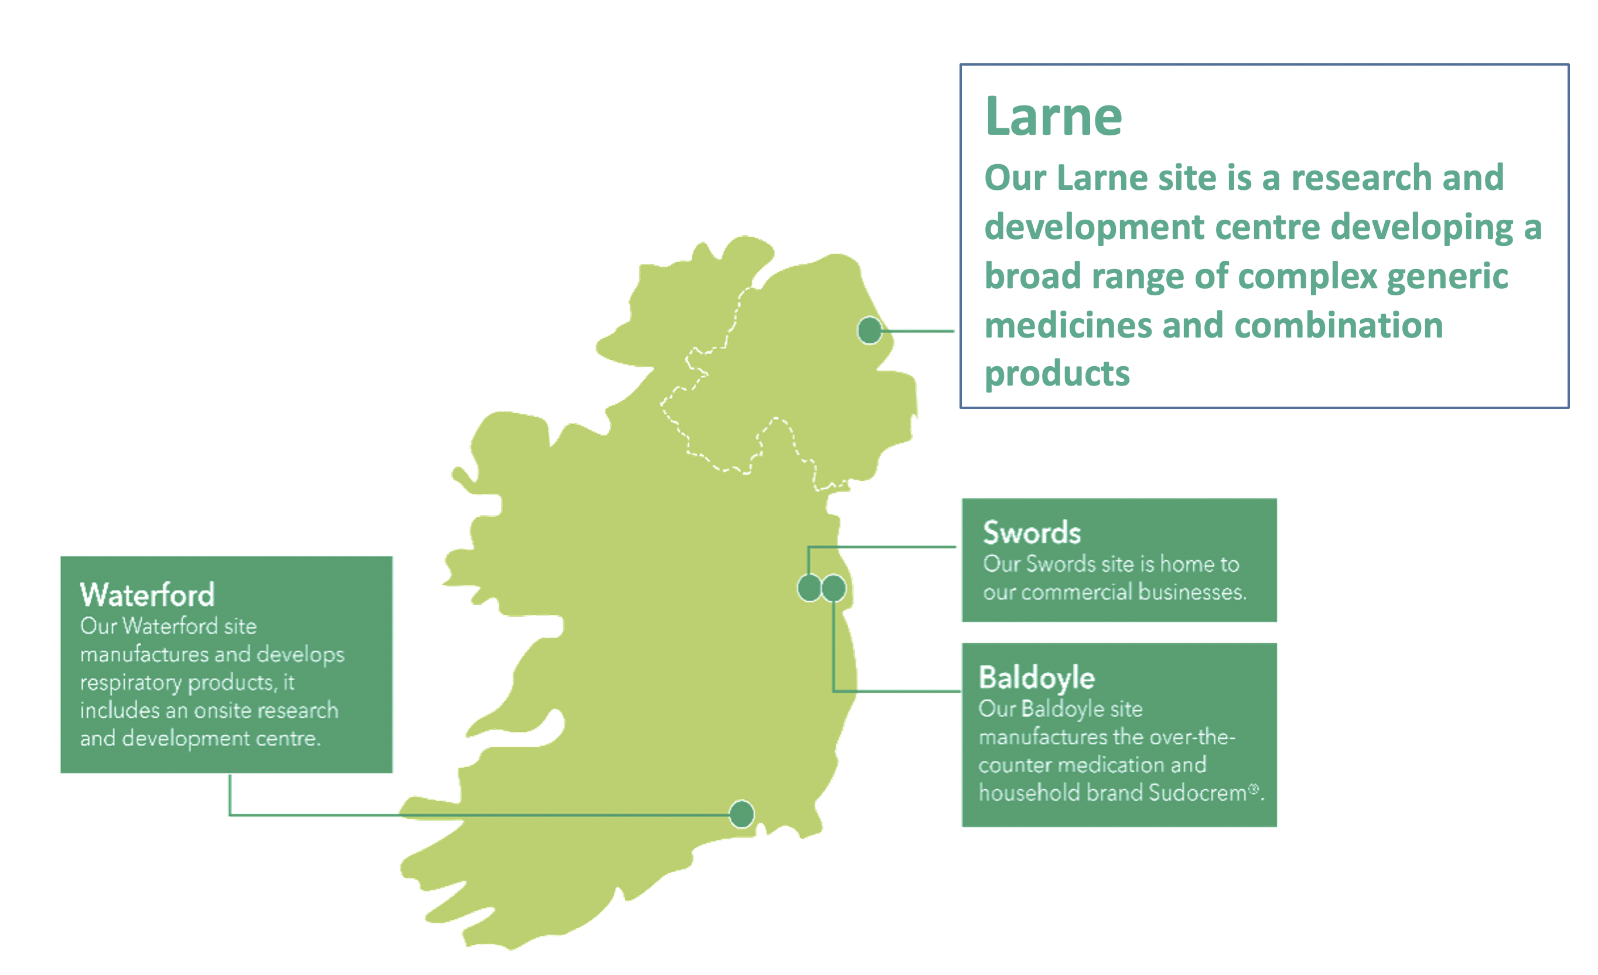 Infographic providing information about Teva's operation in Ireland